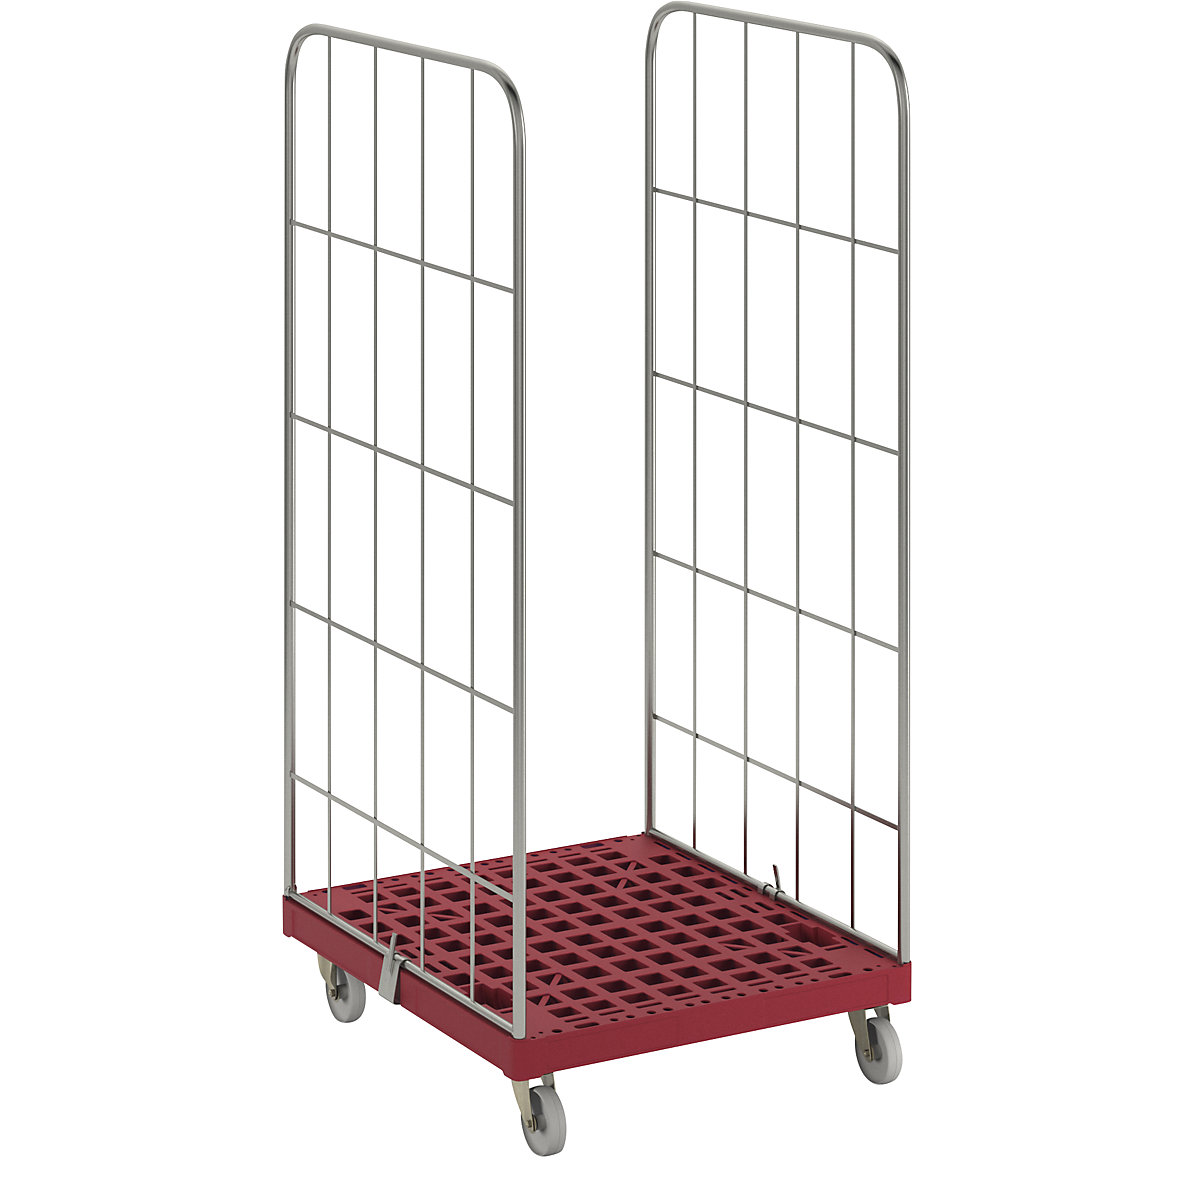 MODULAR roll container, plastic transport dolly, mesh on 2 sides, red dolly-22